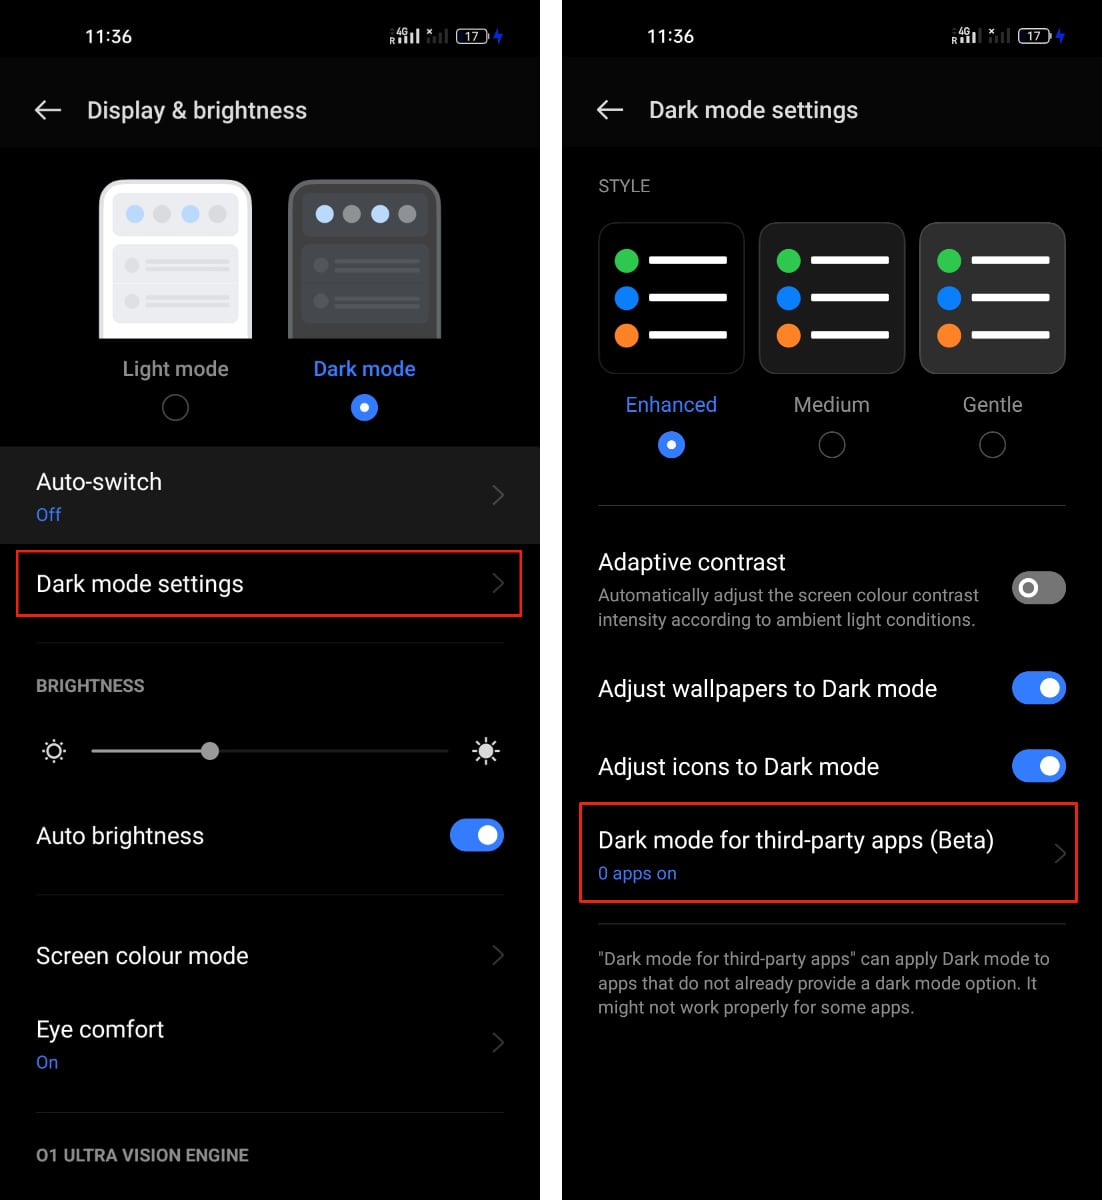 Tap on the Dark mode for third-party apps option